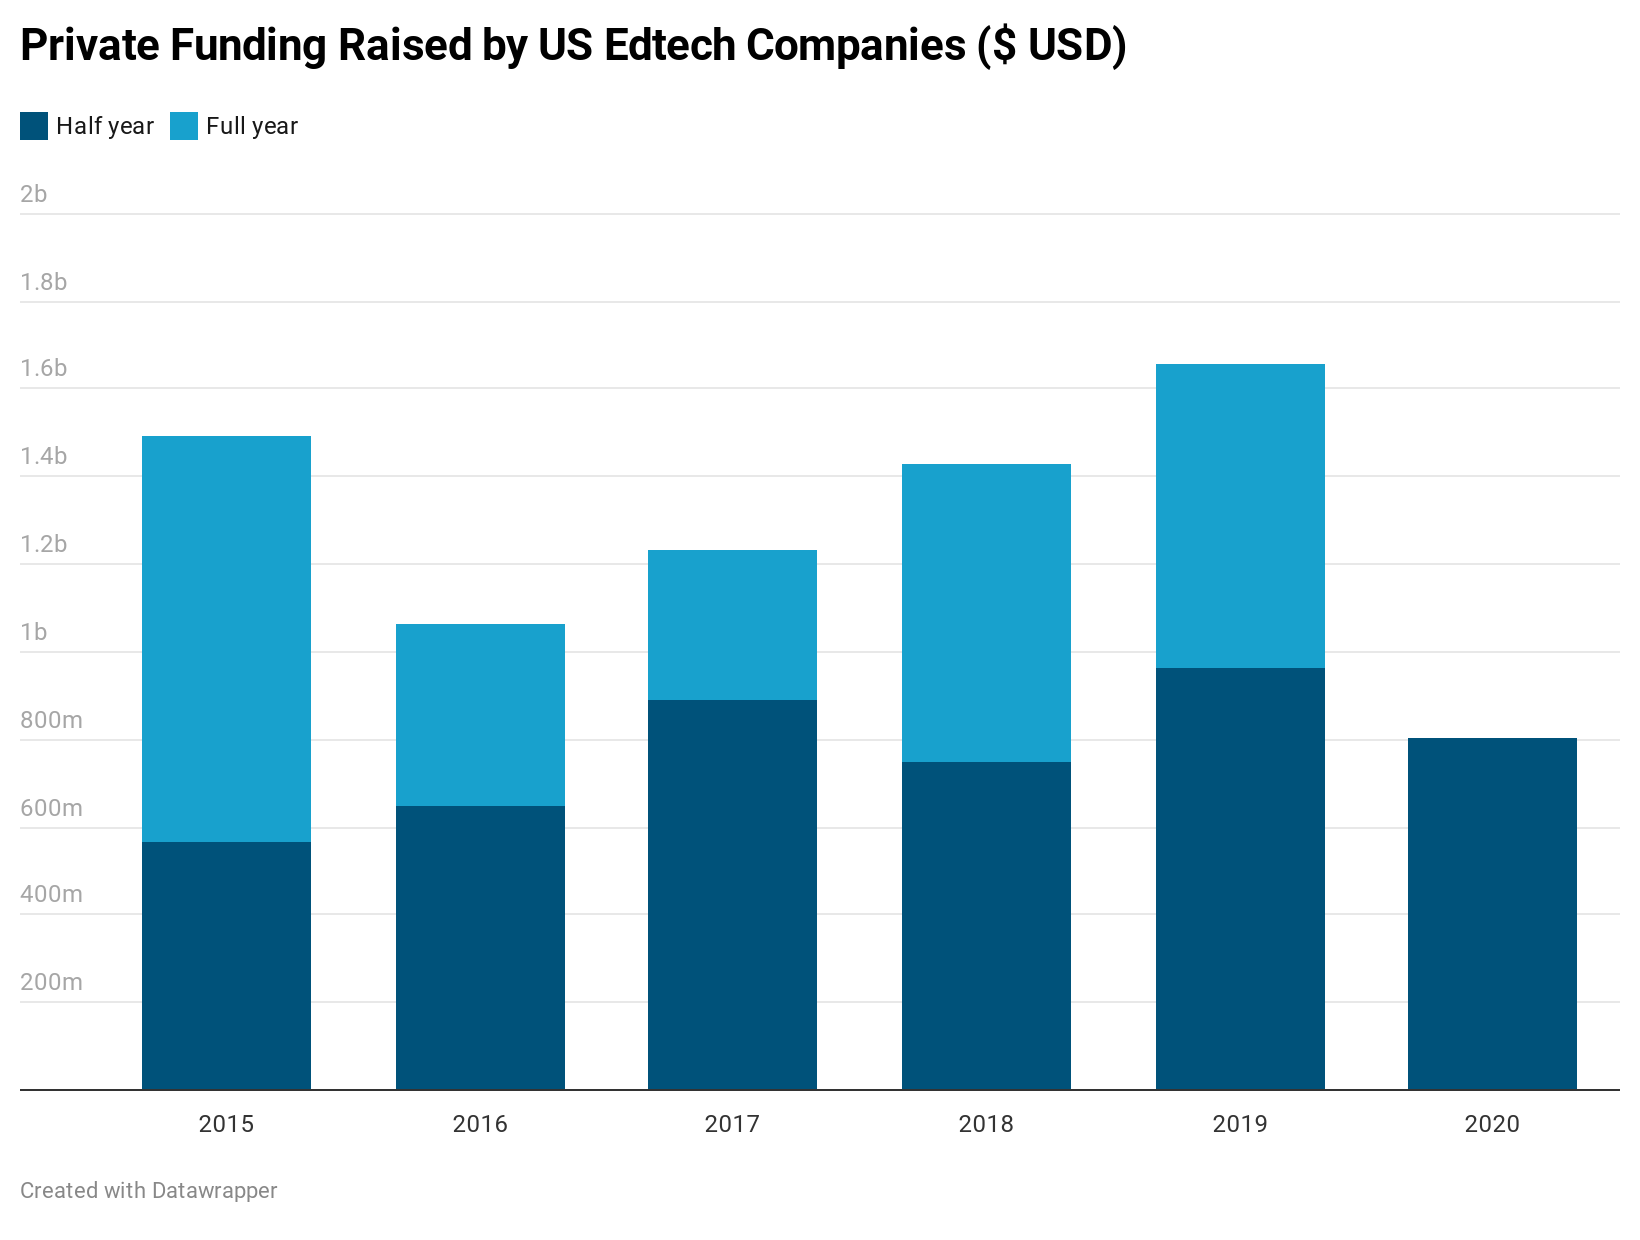 Us Edtech Raises 803m In First Half Of 2020 As Covid 19 Forces Learning Online Edsurge News Ways 2 Rock - roblox an online gaming company for kids is raising up to 150 million pitchbook